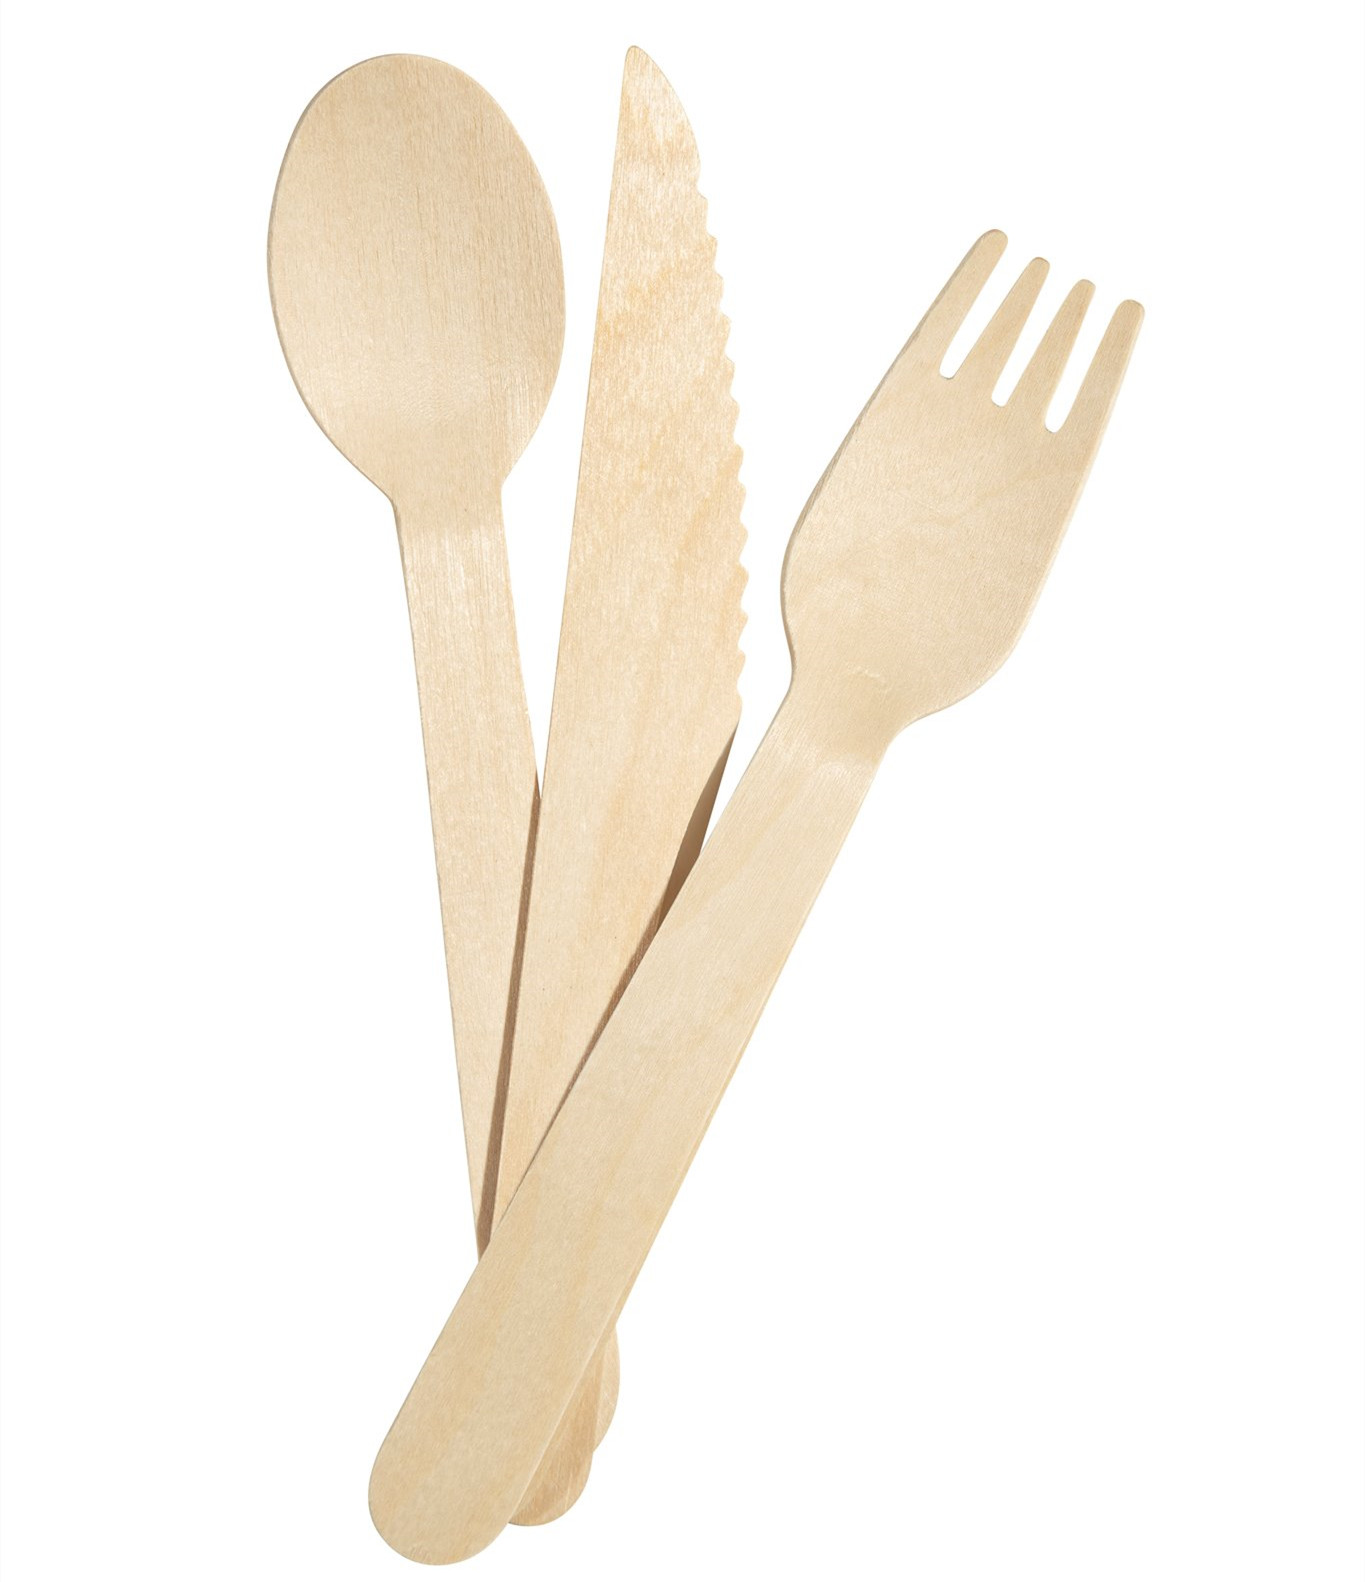 Disposable Sturdy Wooden Cutlery Set 100% Biodegradable Forks Eco-Friendly Spoon Natural Wooden Utensils